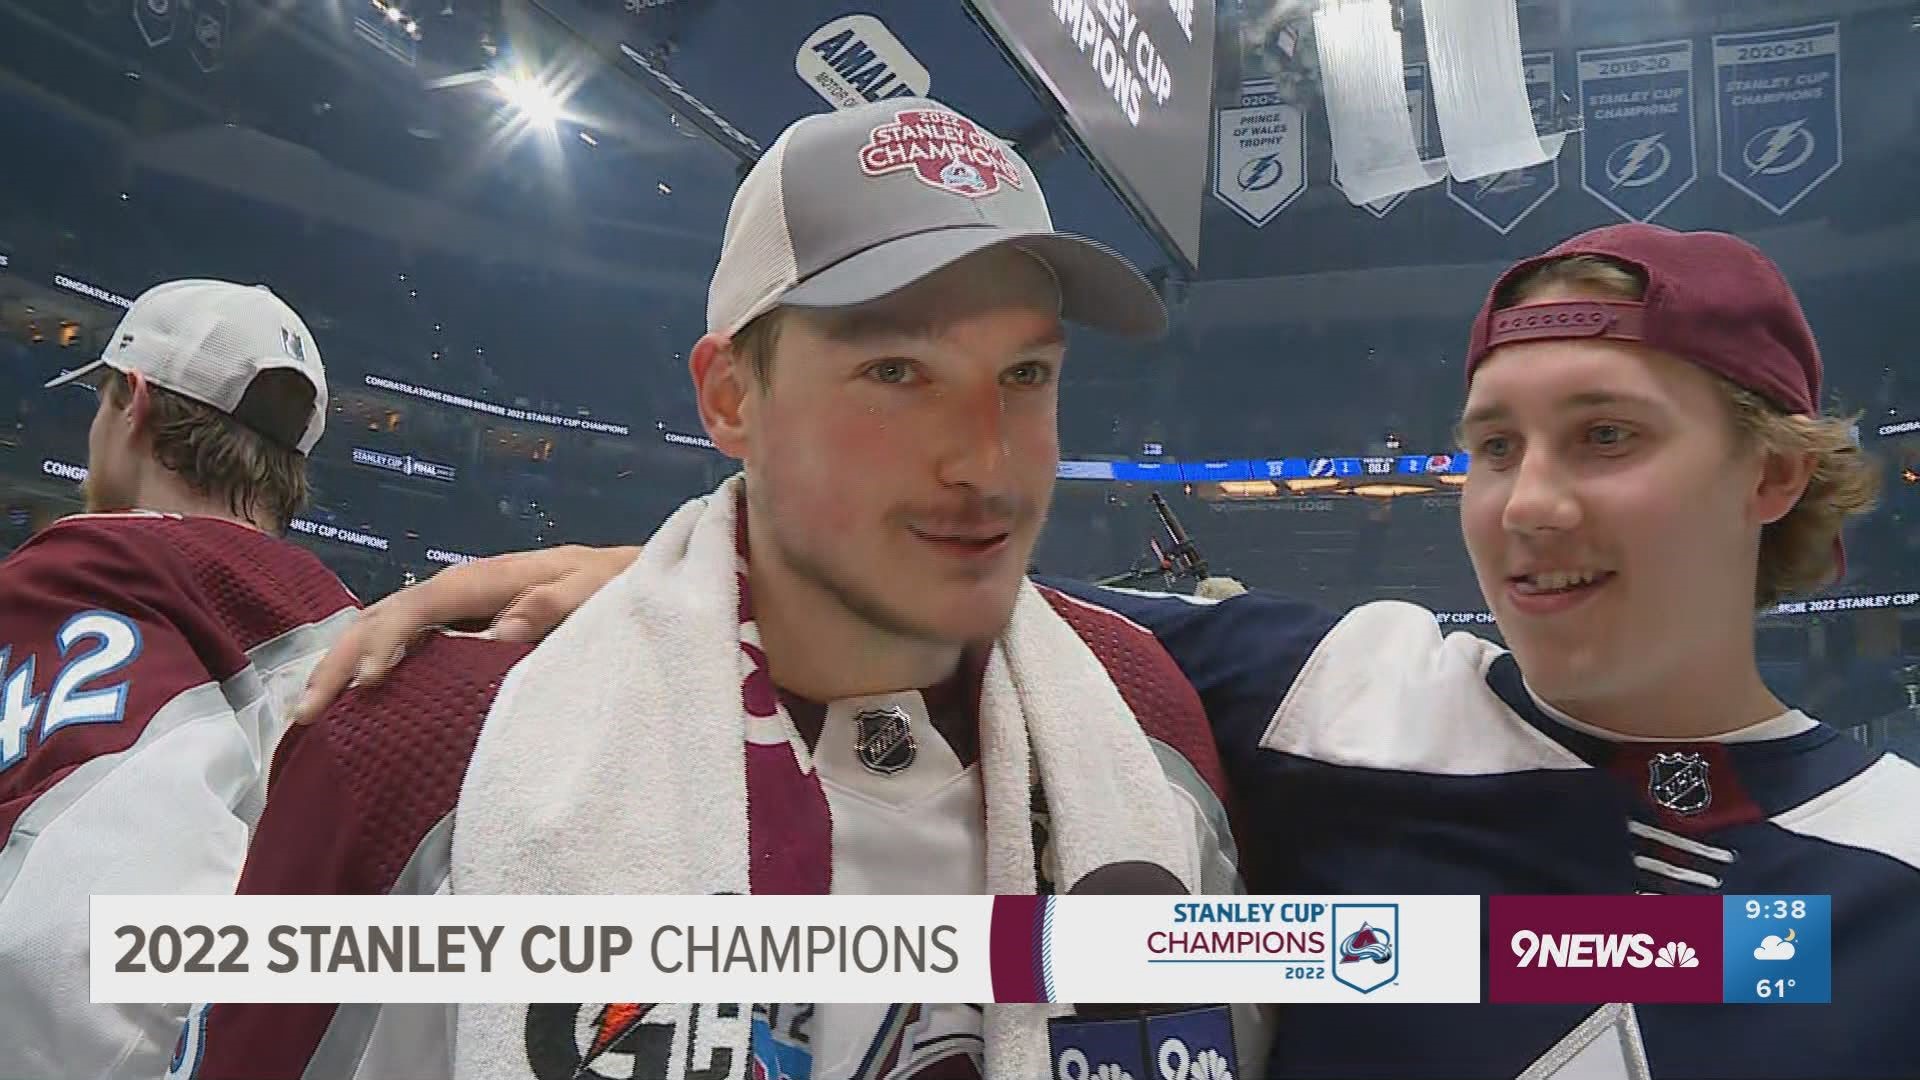 9NEWS' Arielle Orsuto checks in with players after the Avalanche Stanley Cup victory.